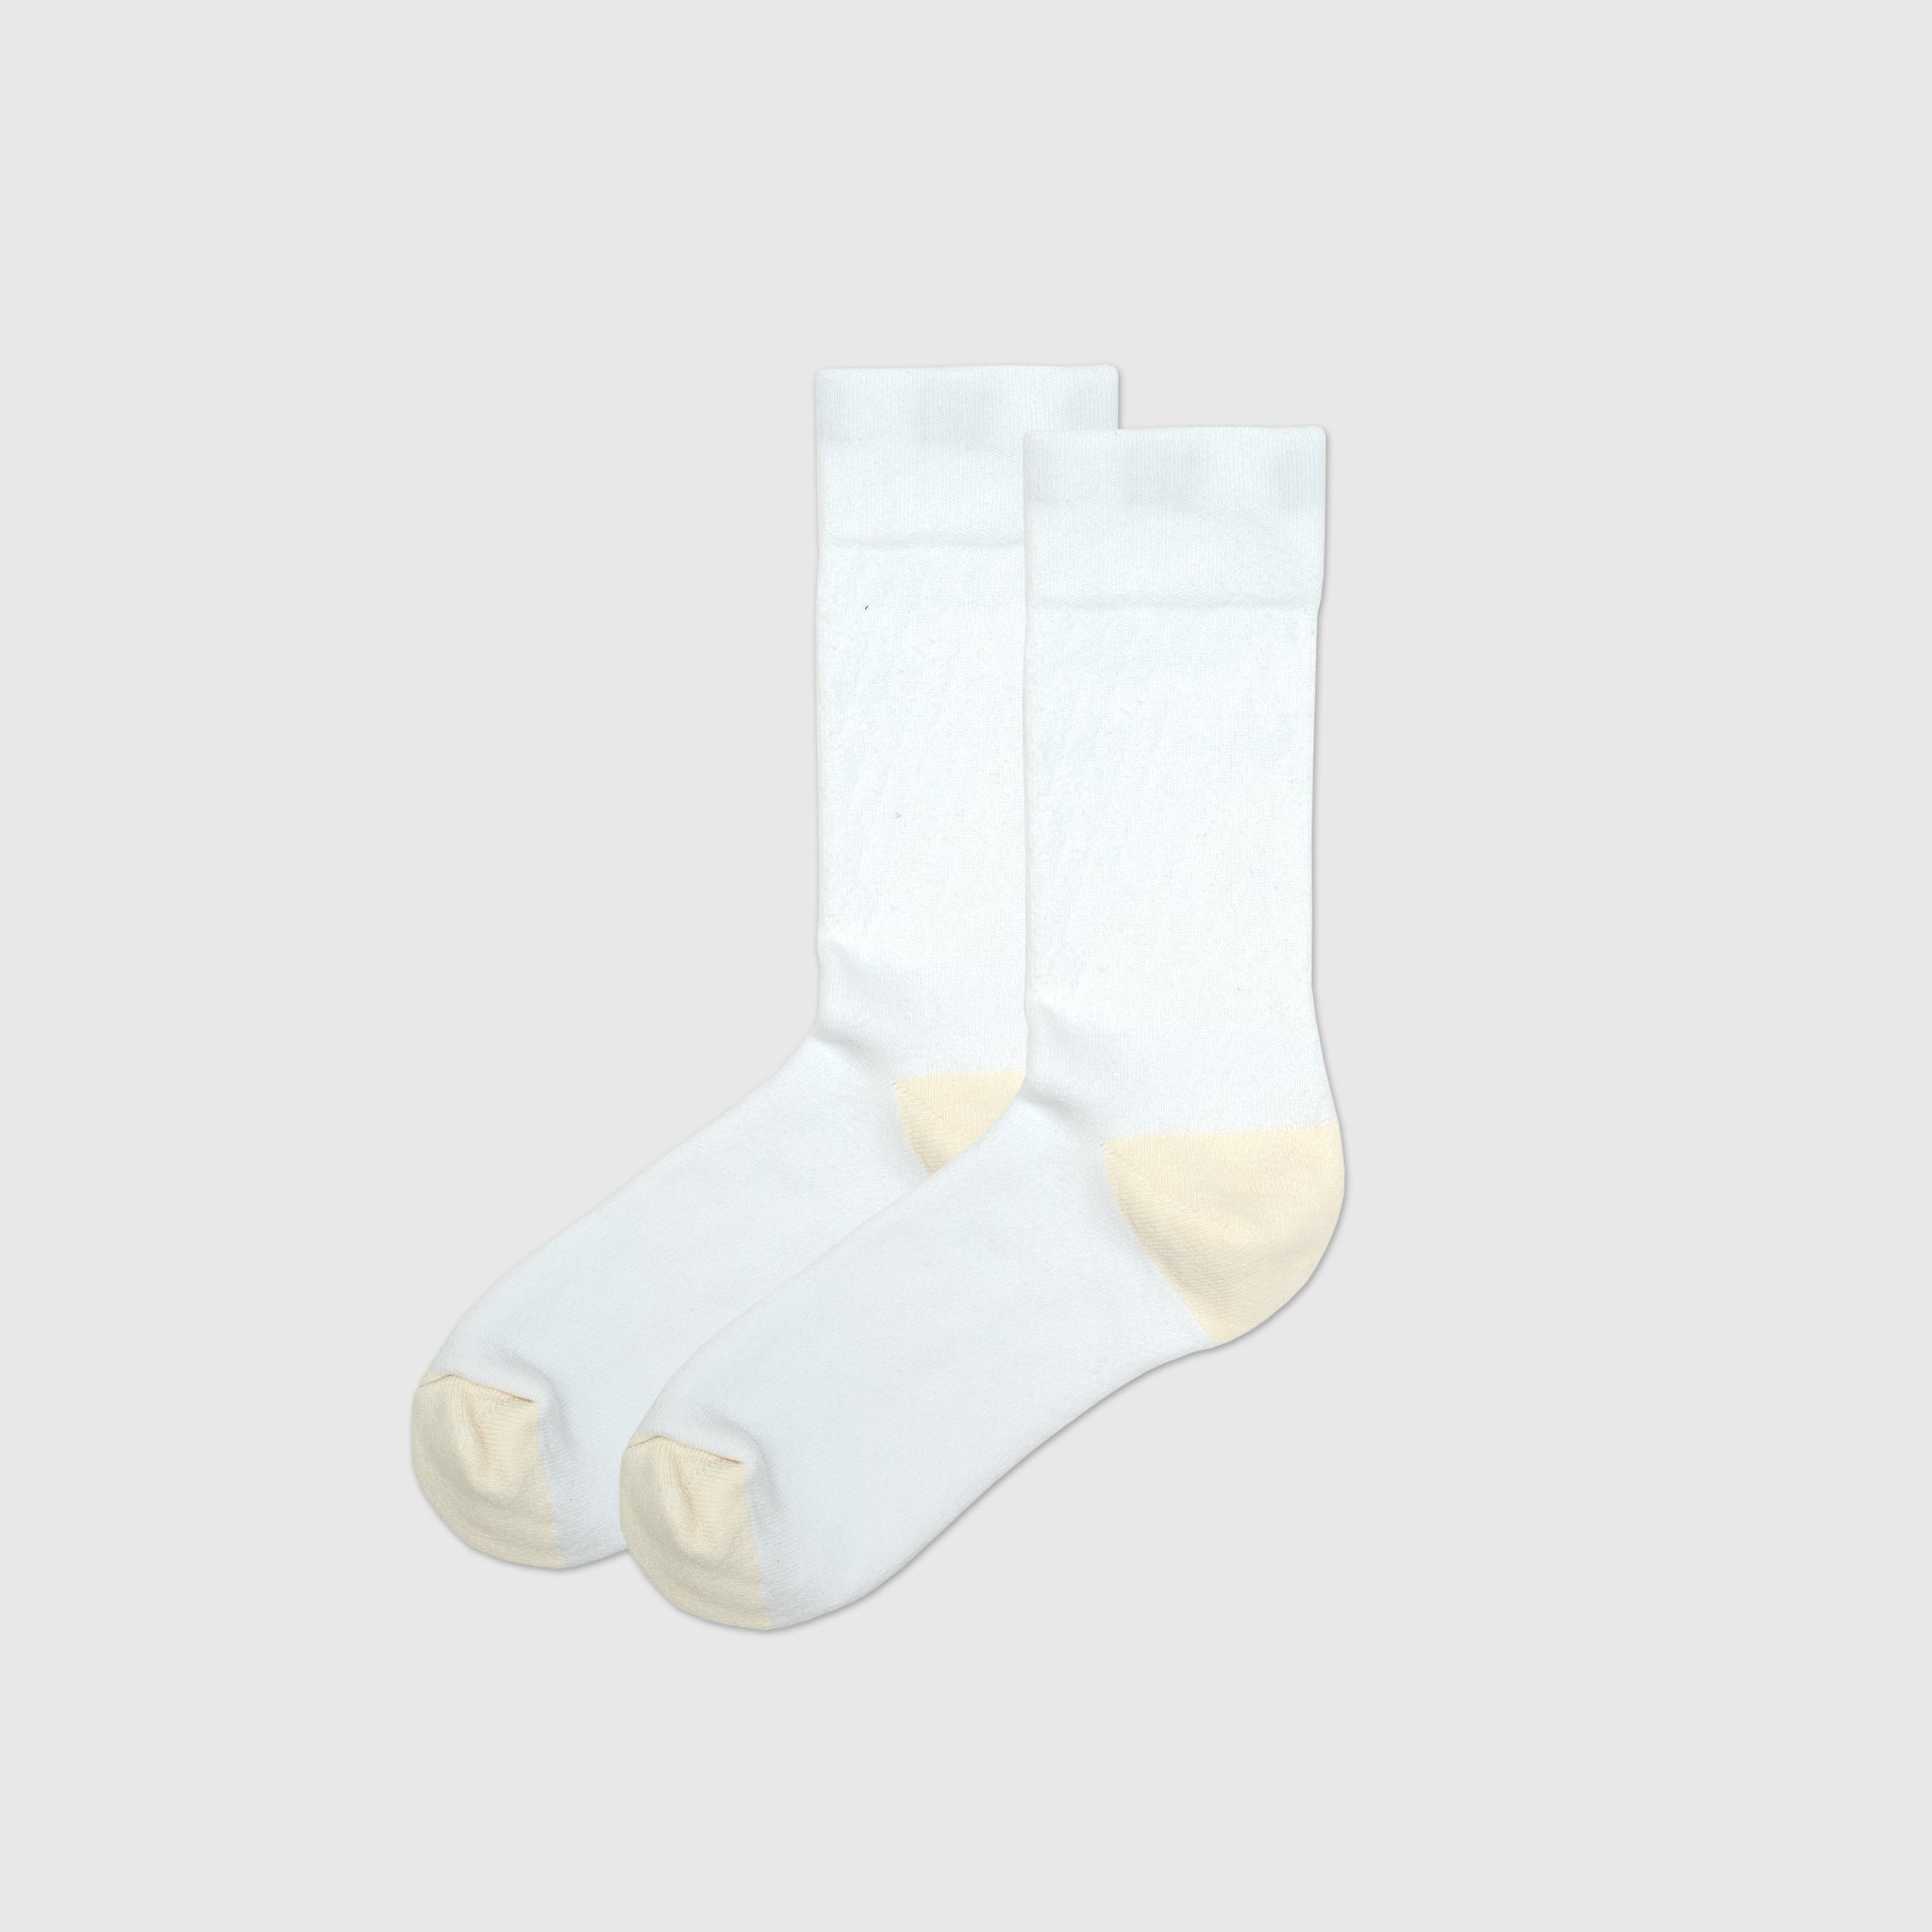 PAA RECYCLED CREW SOX 2.5